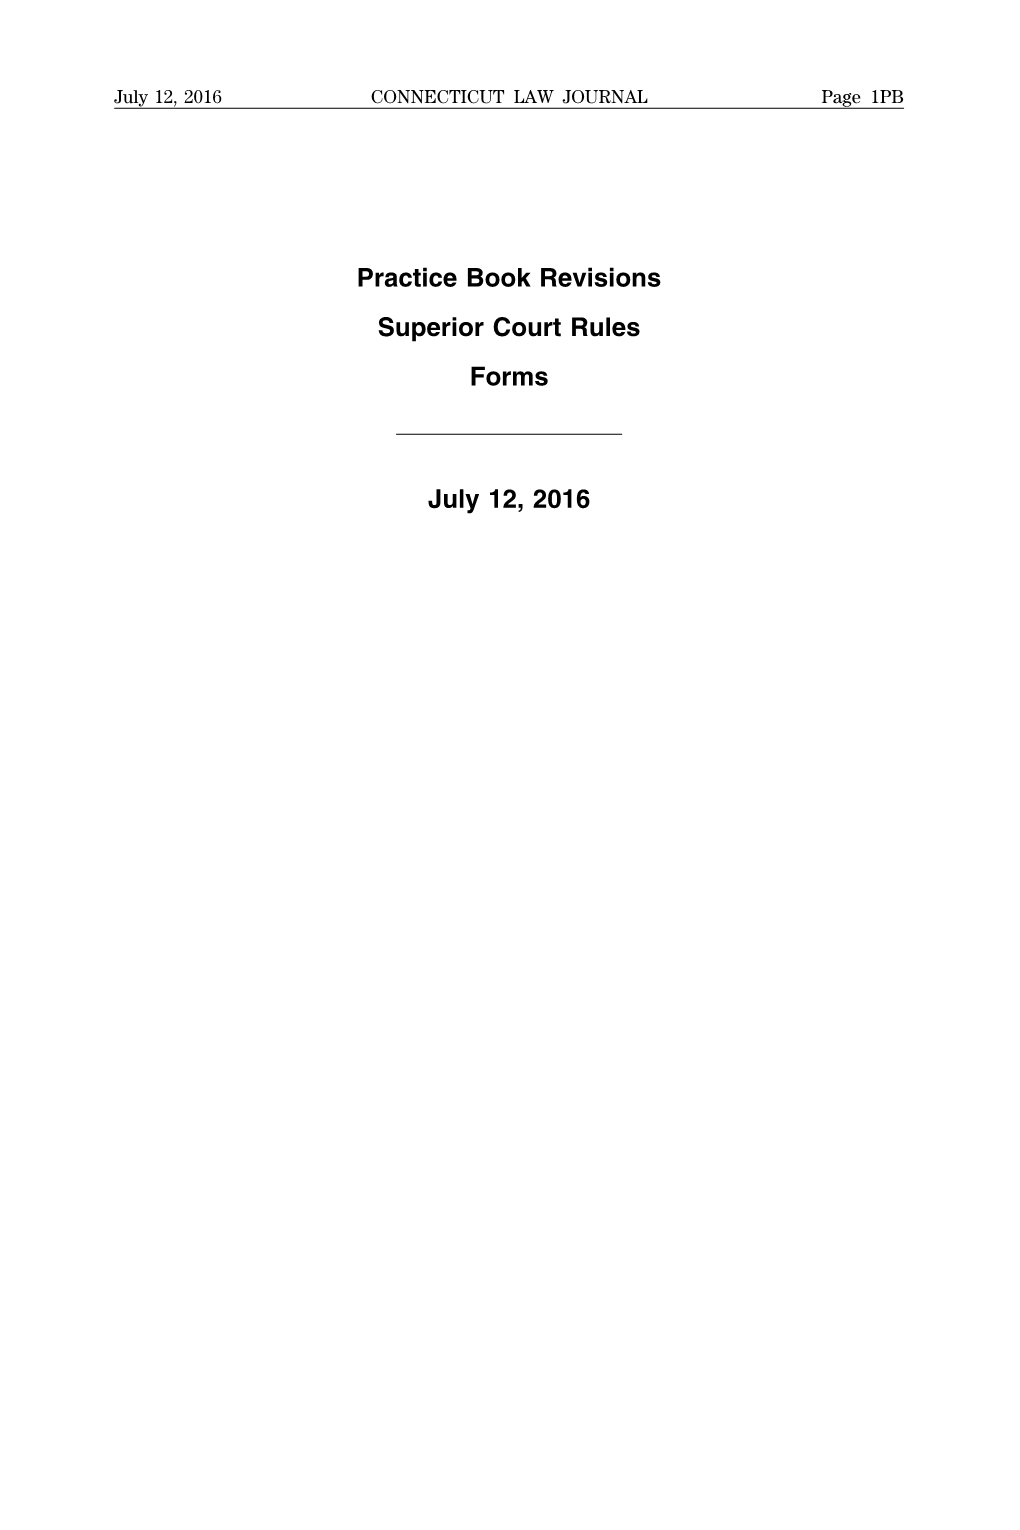 Practice Book Revisions Superior Court Rules Forms July 12, 2016